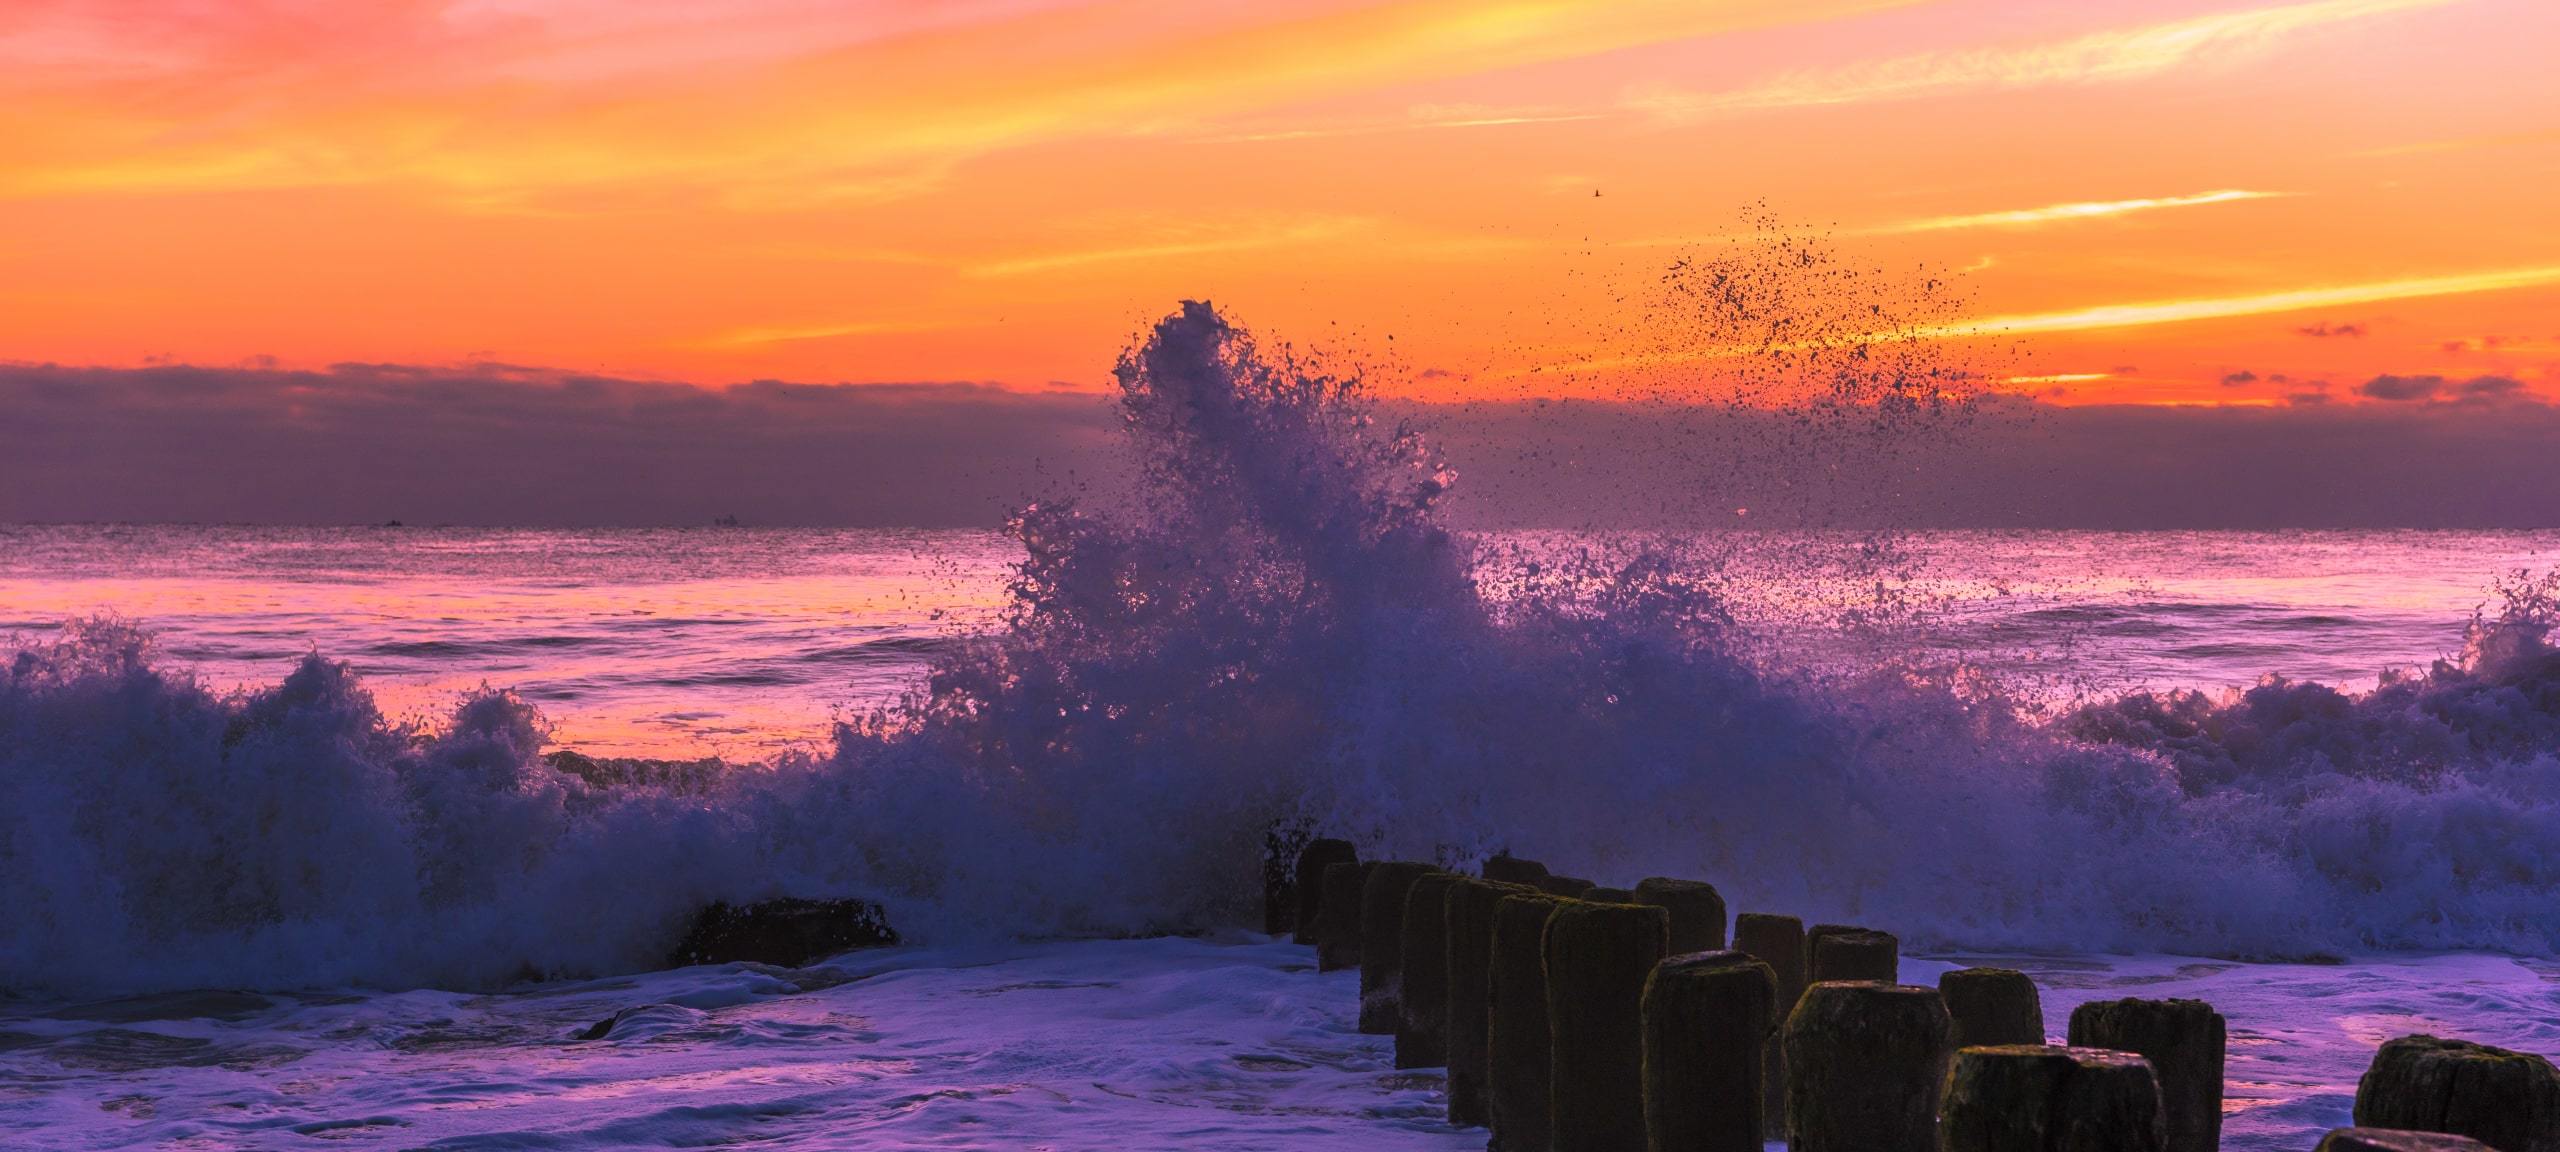 Waves crashing upon shore during sunset in Bay Head, New Jersey